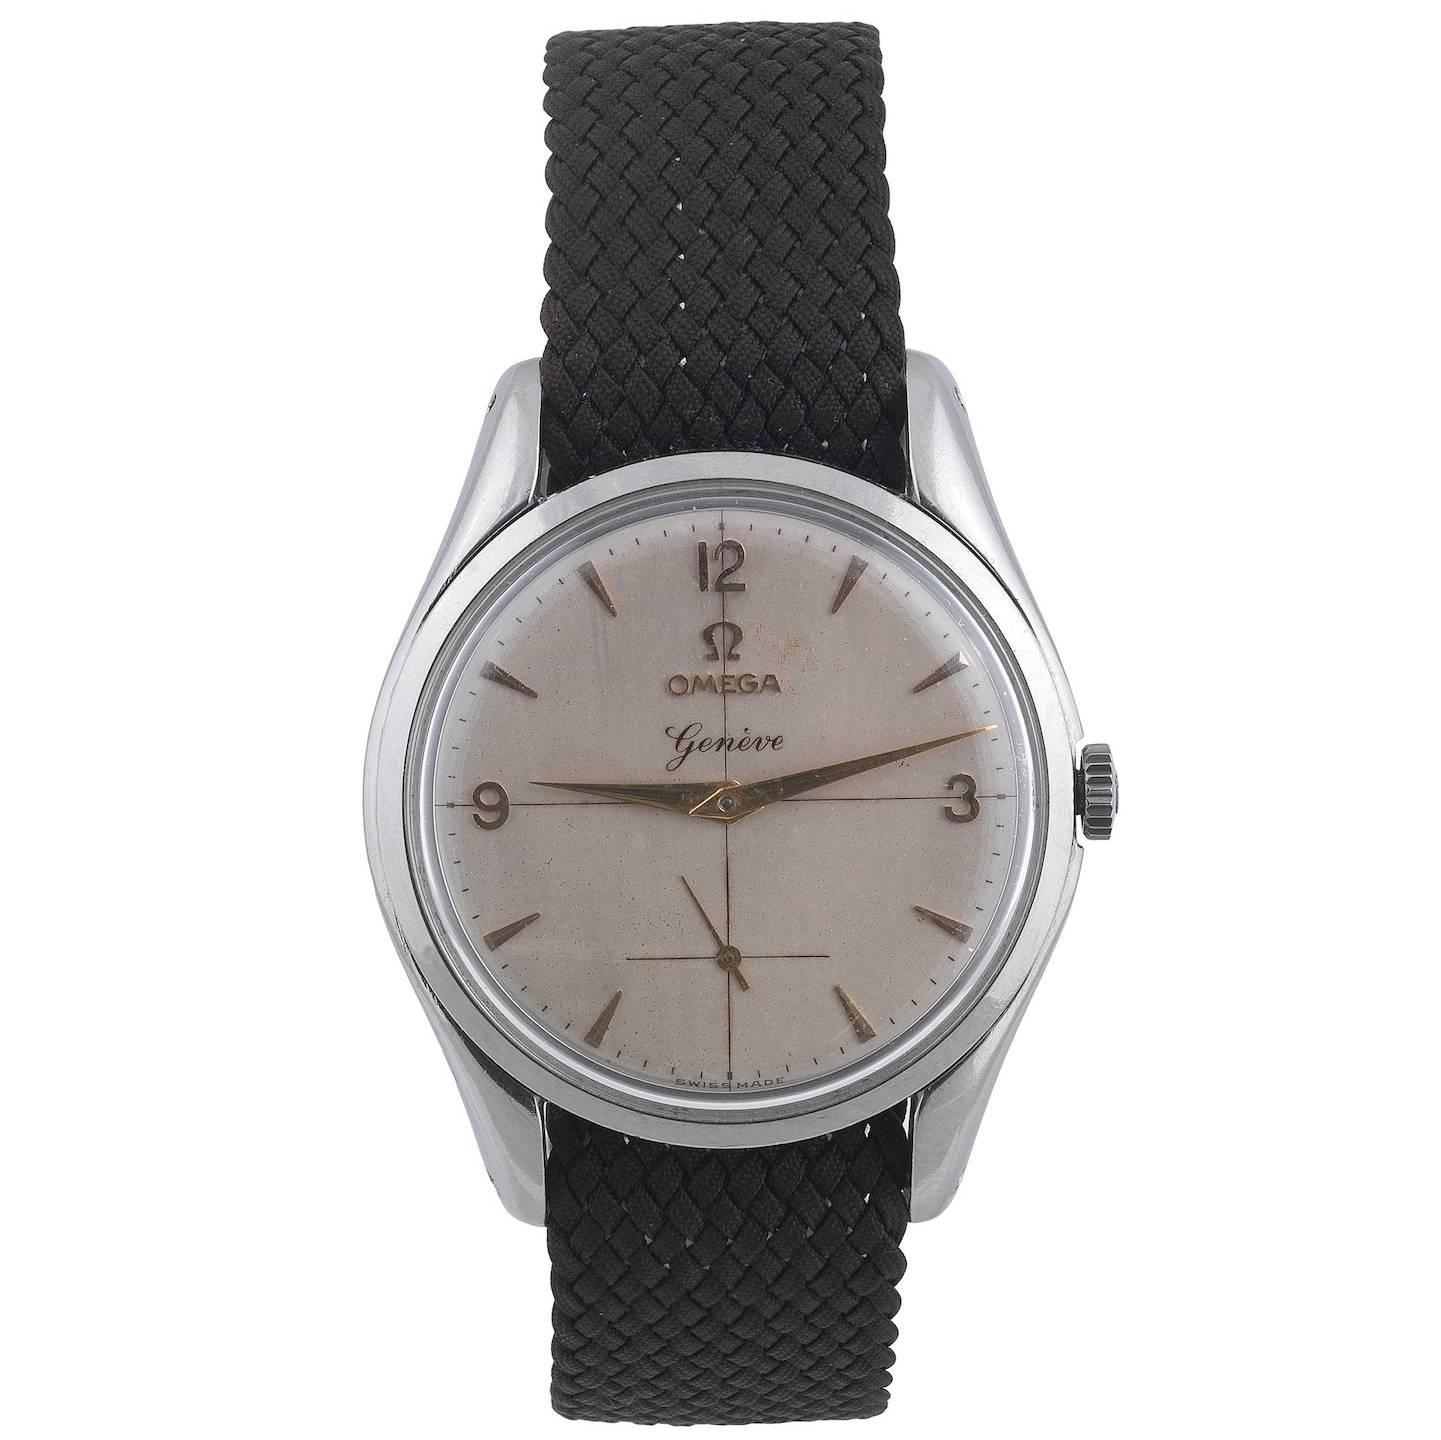 BERNARDO ANTICHITÀ PONTE VECCHIO FLORENCE
Ref. 2503. Made in 1950’s
Case three-body, polished and brushed, curved lugs, snap on case back.
Dial silvered with applied gilt arab numbers and arrow baton, subsidiary dial for the seconds. Gilt arrow